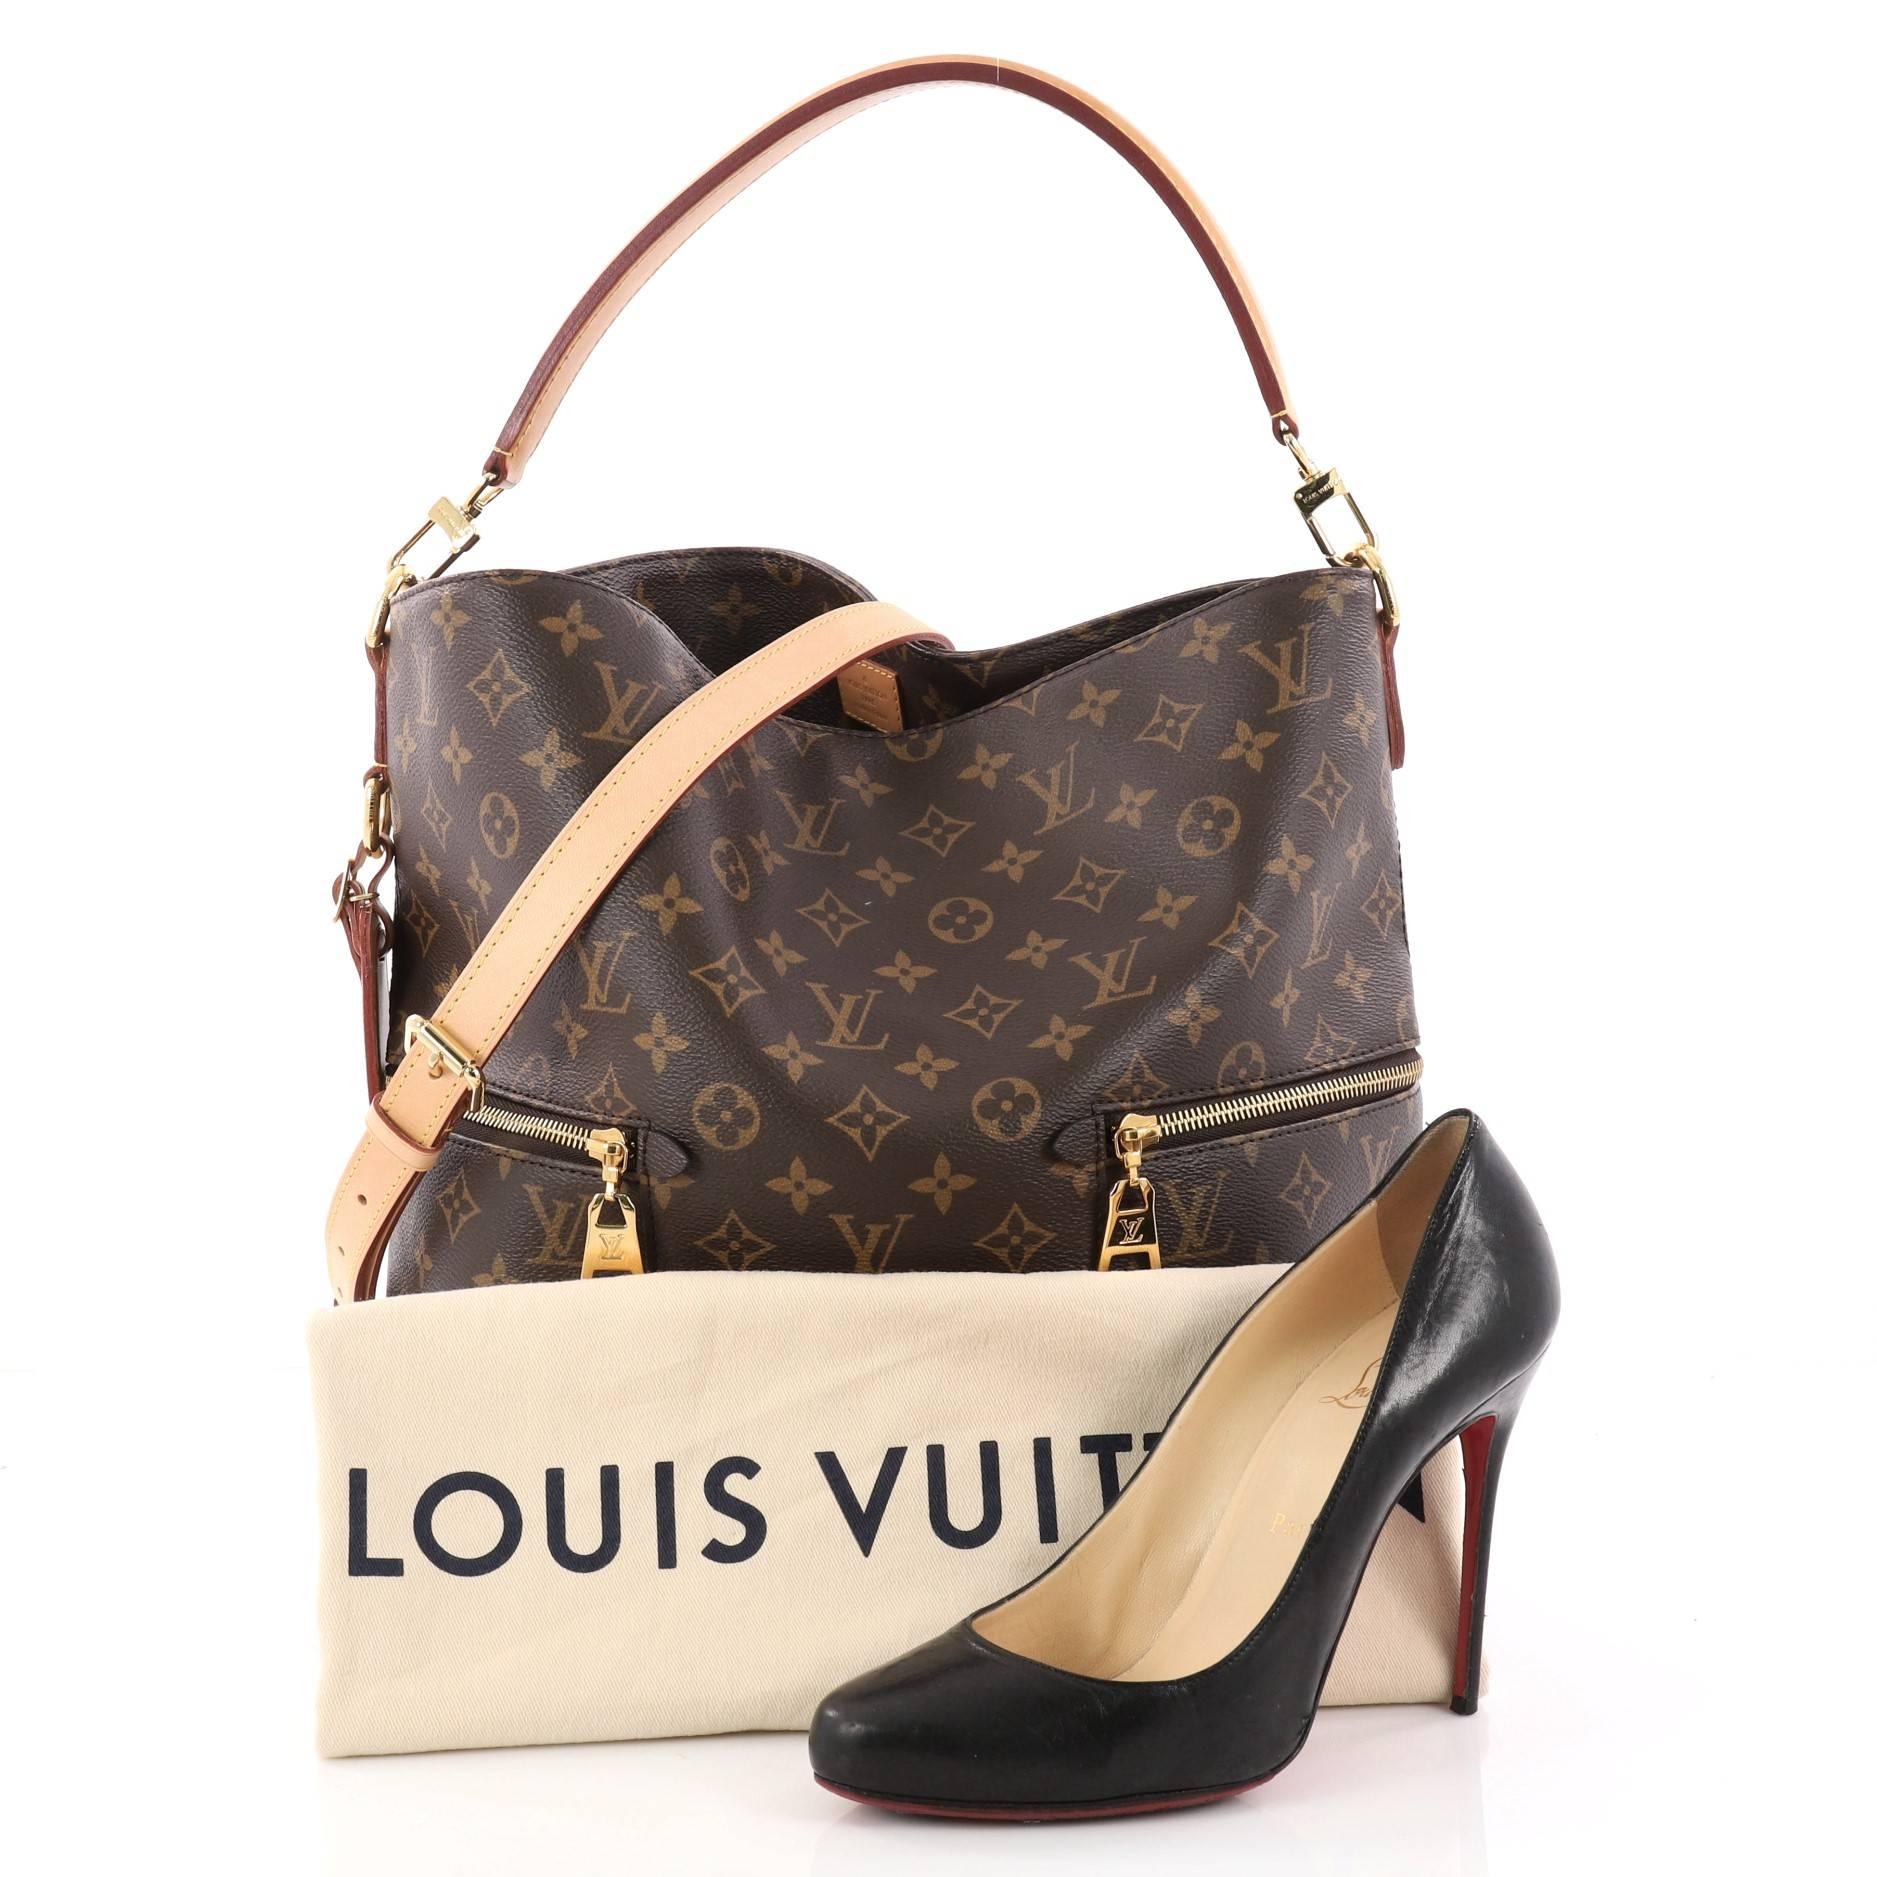 This authentic Louis Vuitton Melie Handbag Monogram Canvas is a fresh take on the classic hobo design. Crafted in brown monogram coated canvas, this bag features a flat leather short handle, two exterior zip pockets, protective base studs and